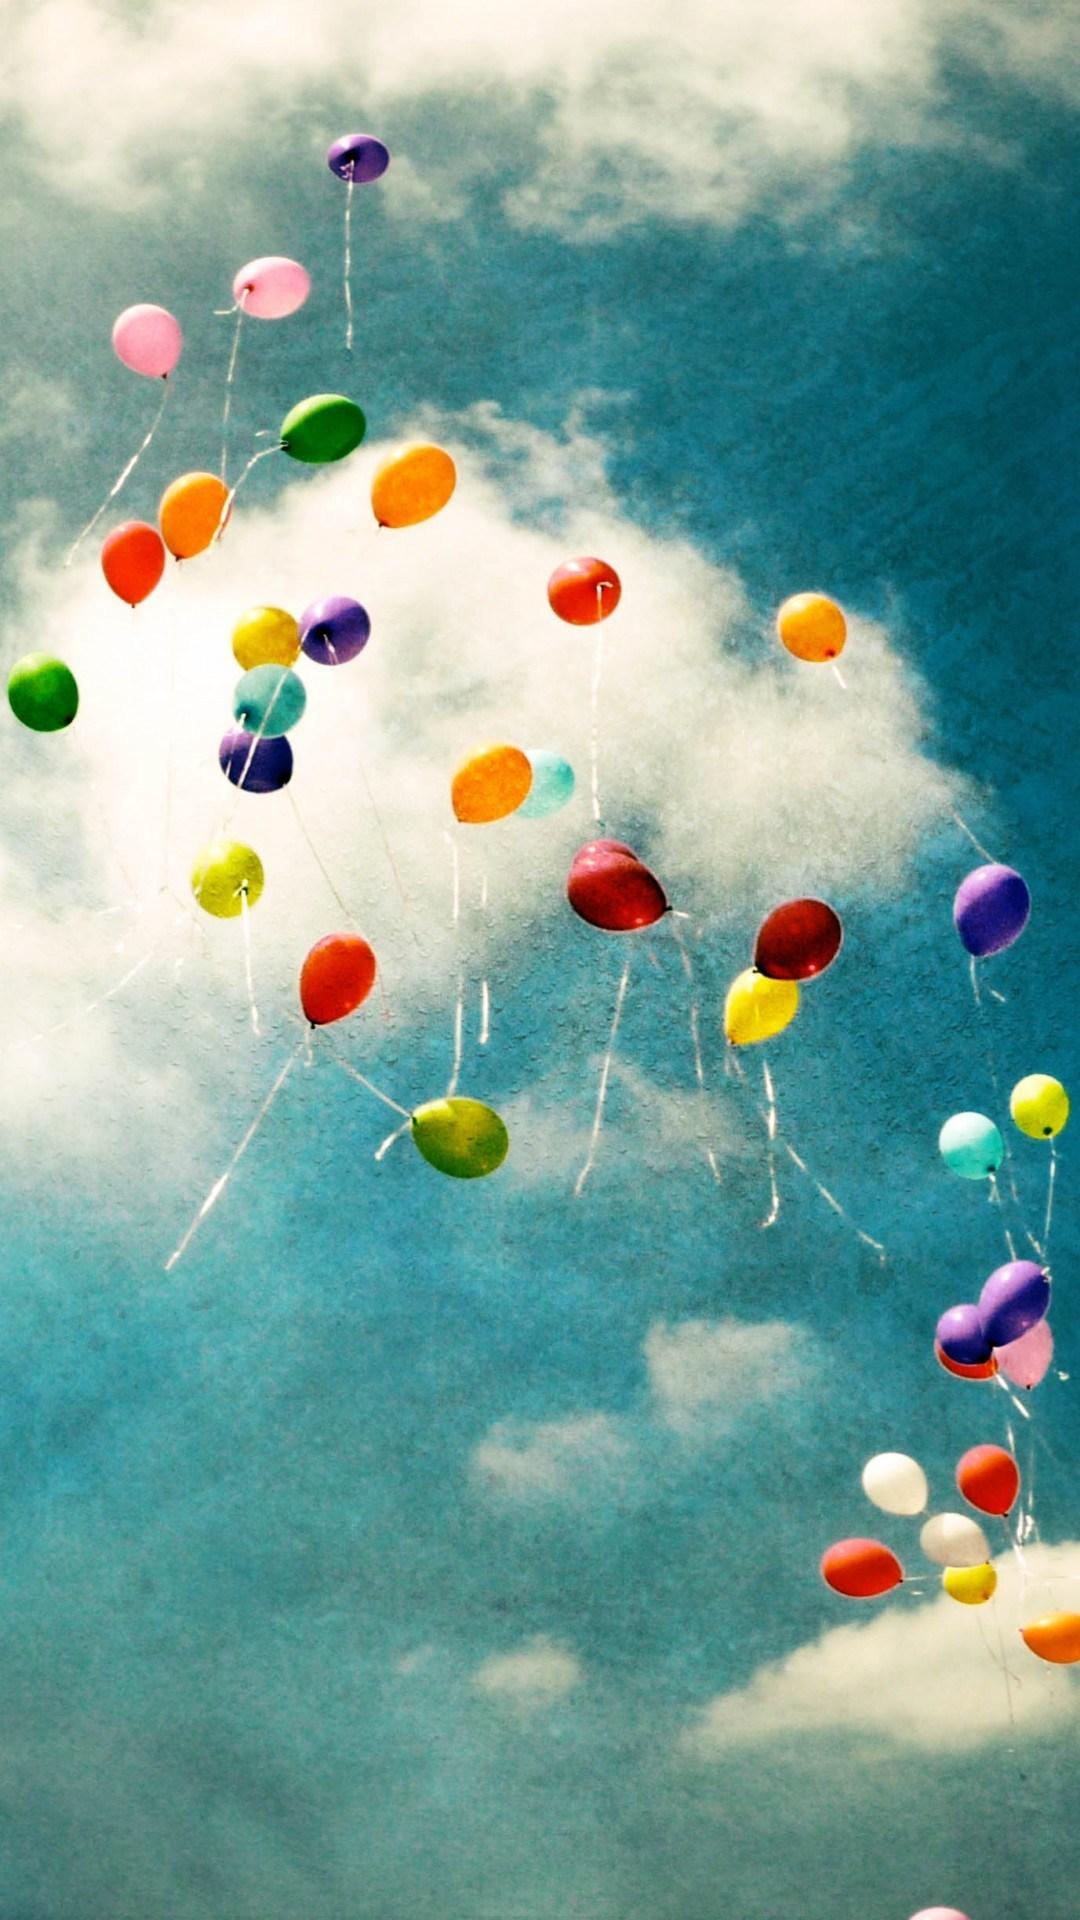 Colorful Balloons In The Sky iPhone 6 / 6 Plus and iPhone 5